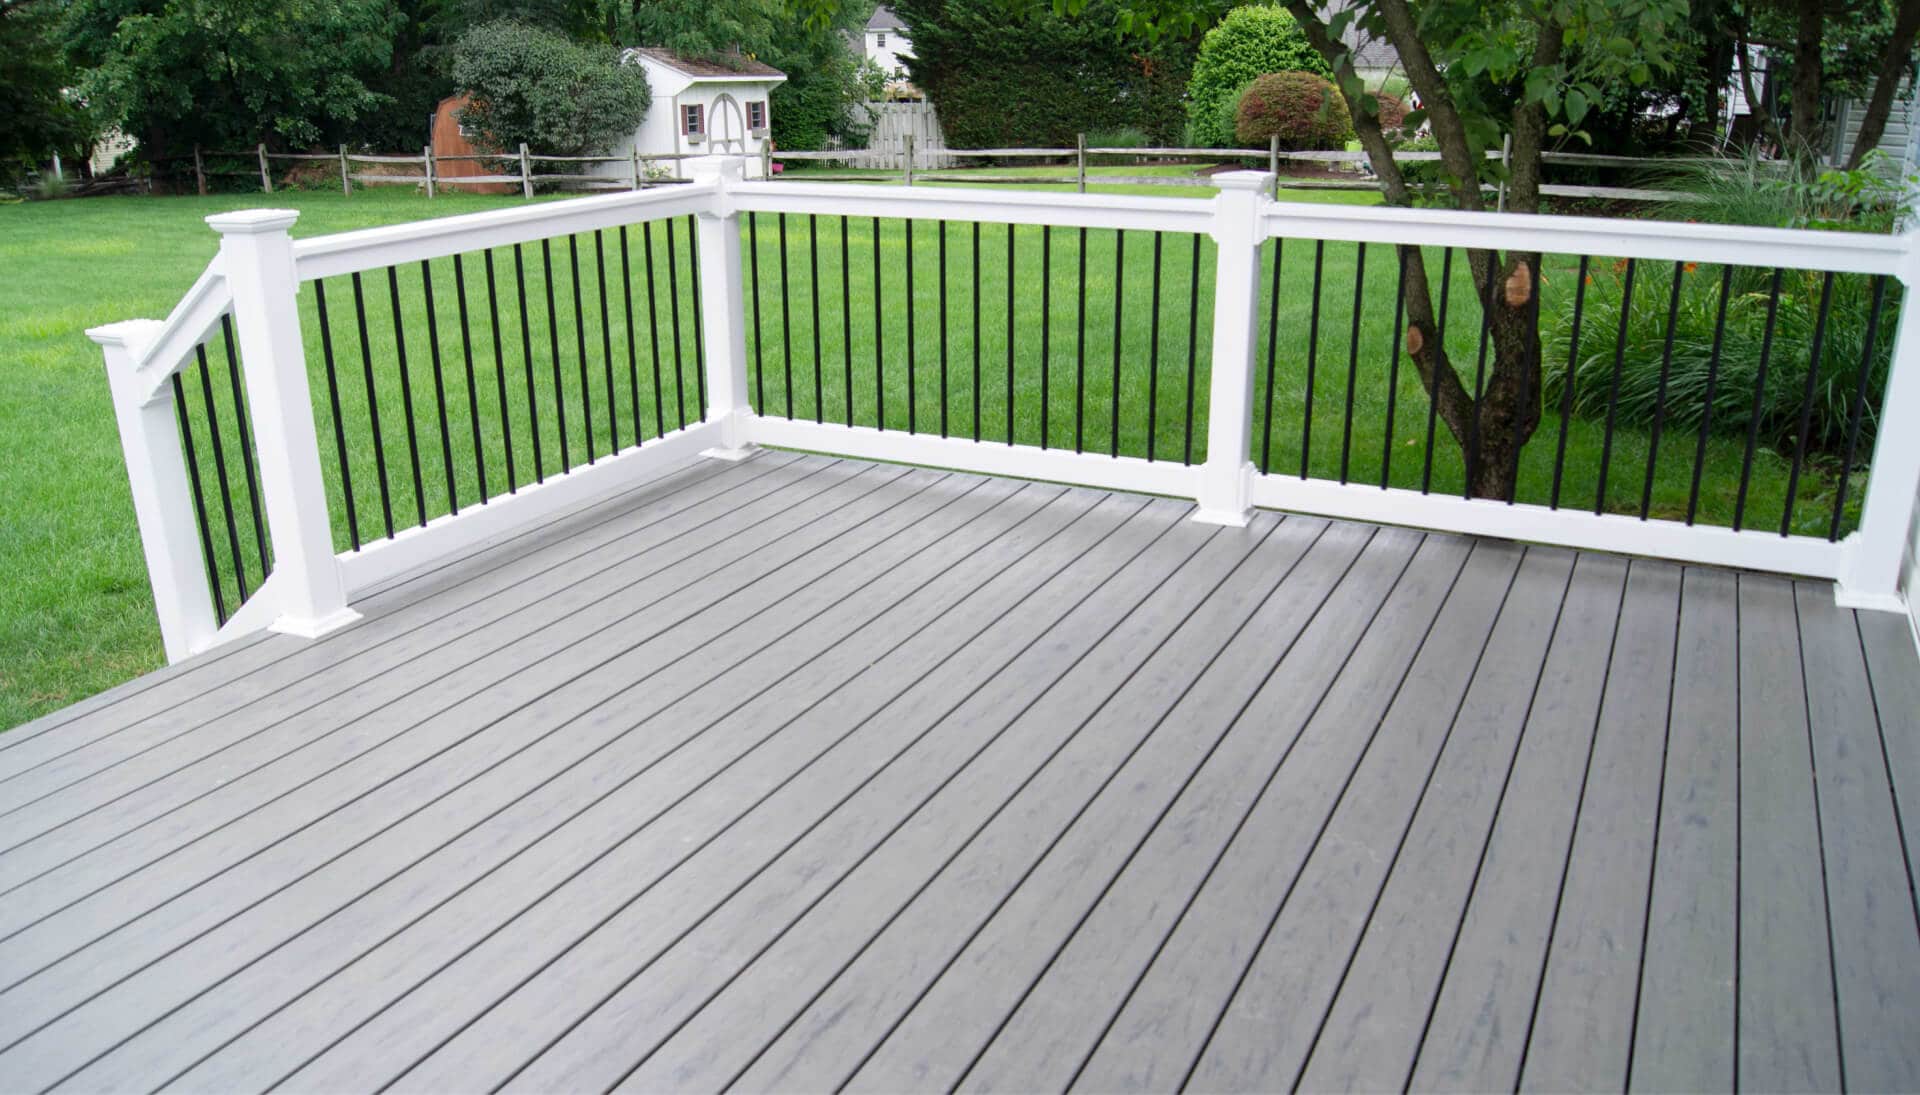 Minneapolis, MN's Premier Deck Building Service: Our Railing and Covers Are Second to None